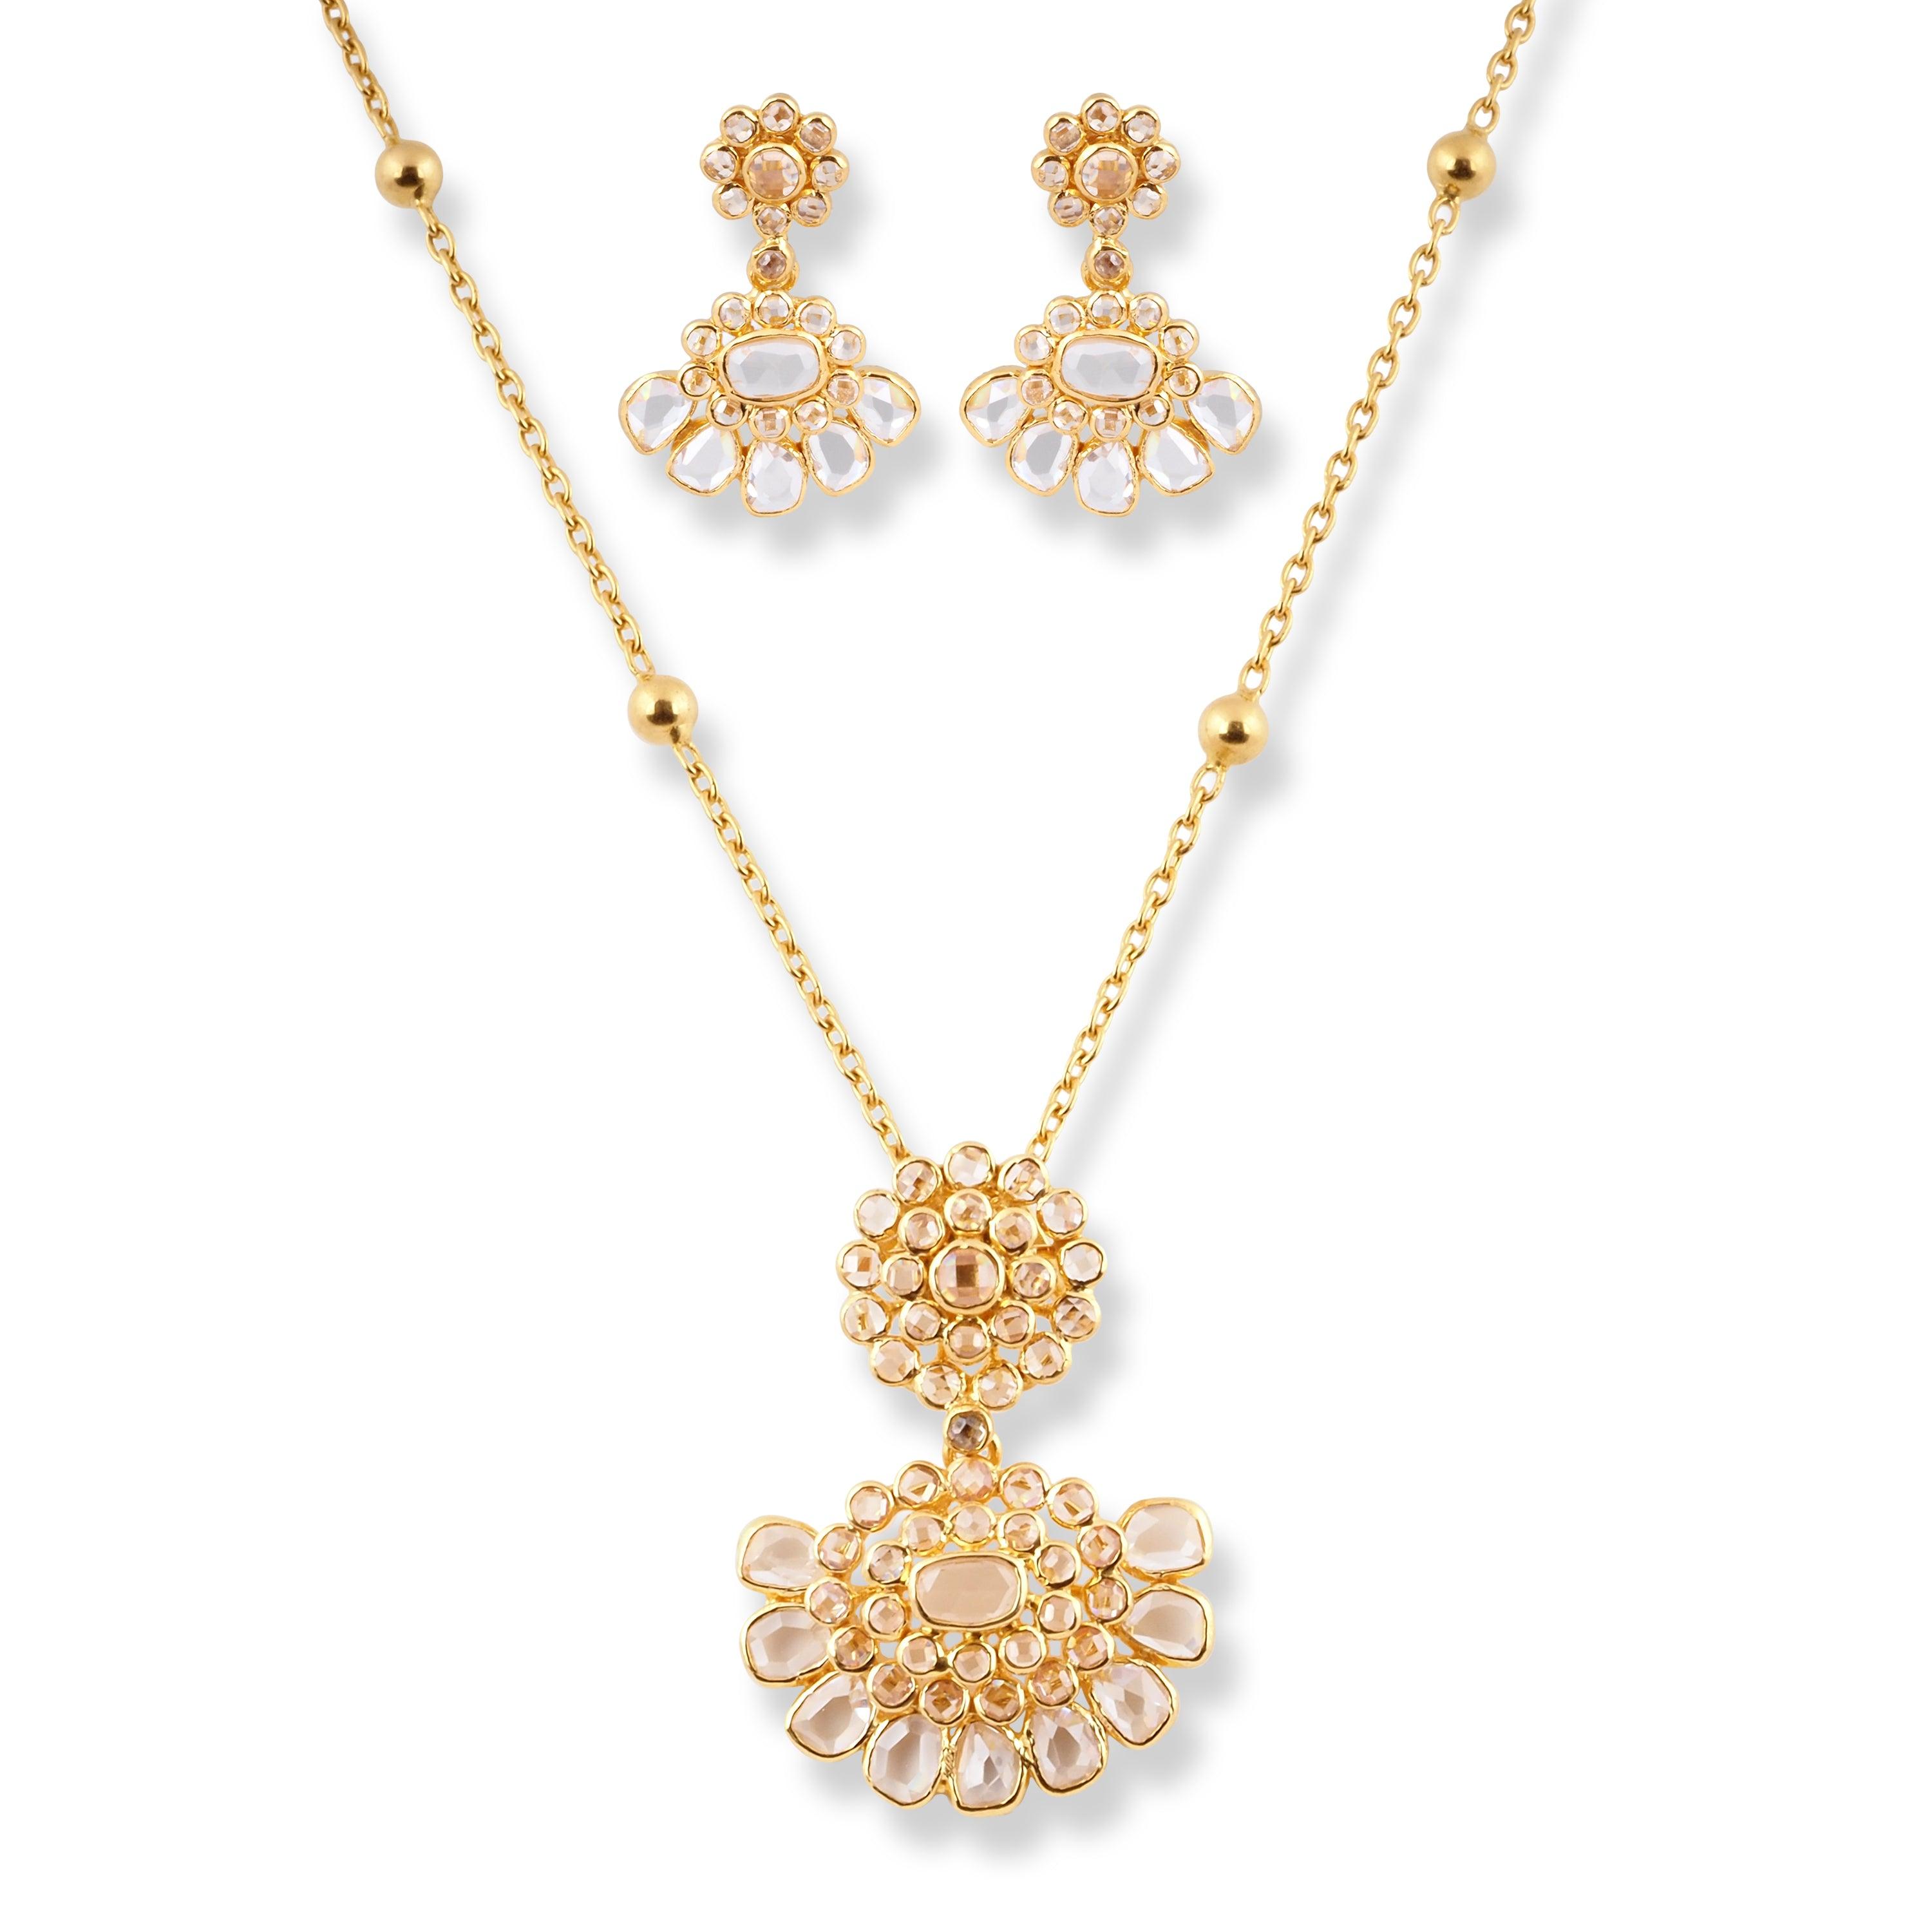 22ct Yellow Gold Necklace & Earrings with Polki Style Cubic Zirconia Stones N-7053 E-7053A - Minar Jewellers